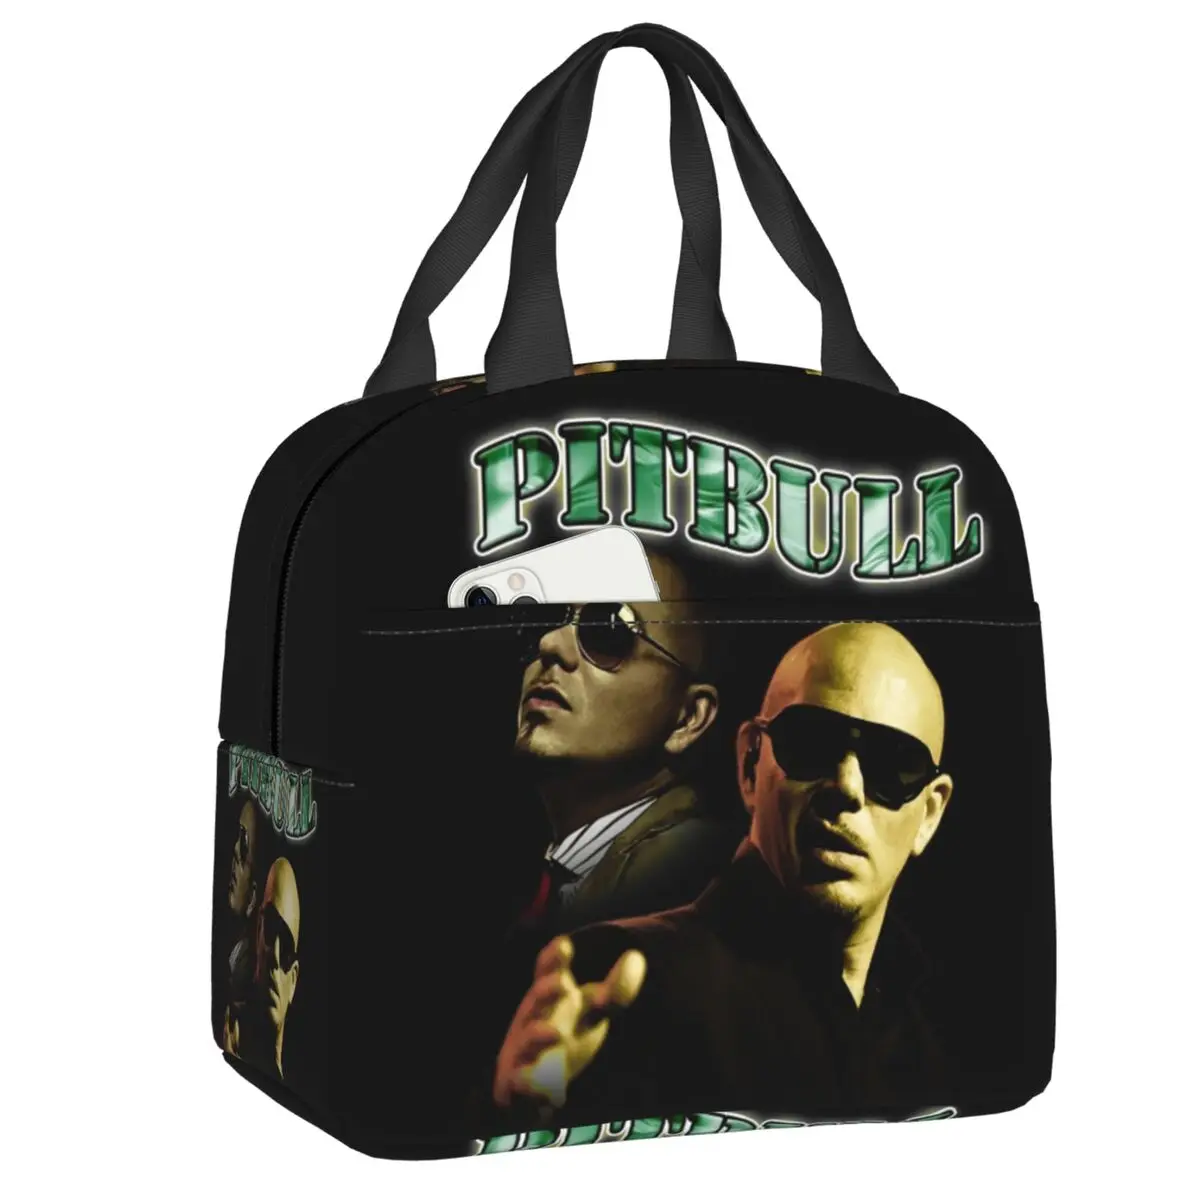 

Pitbull Rap Bootleg Thermal Insulated Lunch Bags Women Mr World Rapper Singer Resuable Lunch Tote Multifunction Food Box